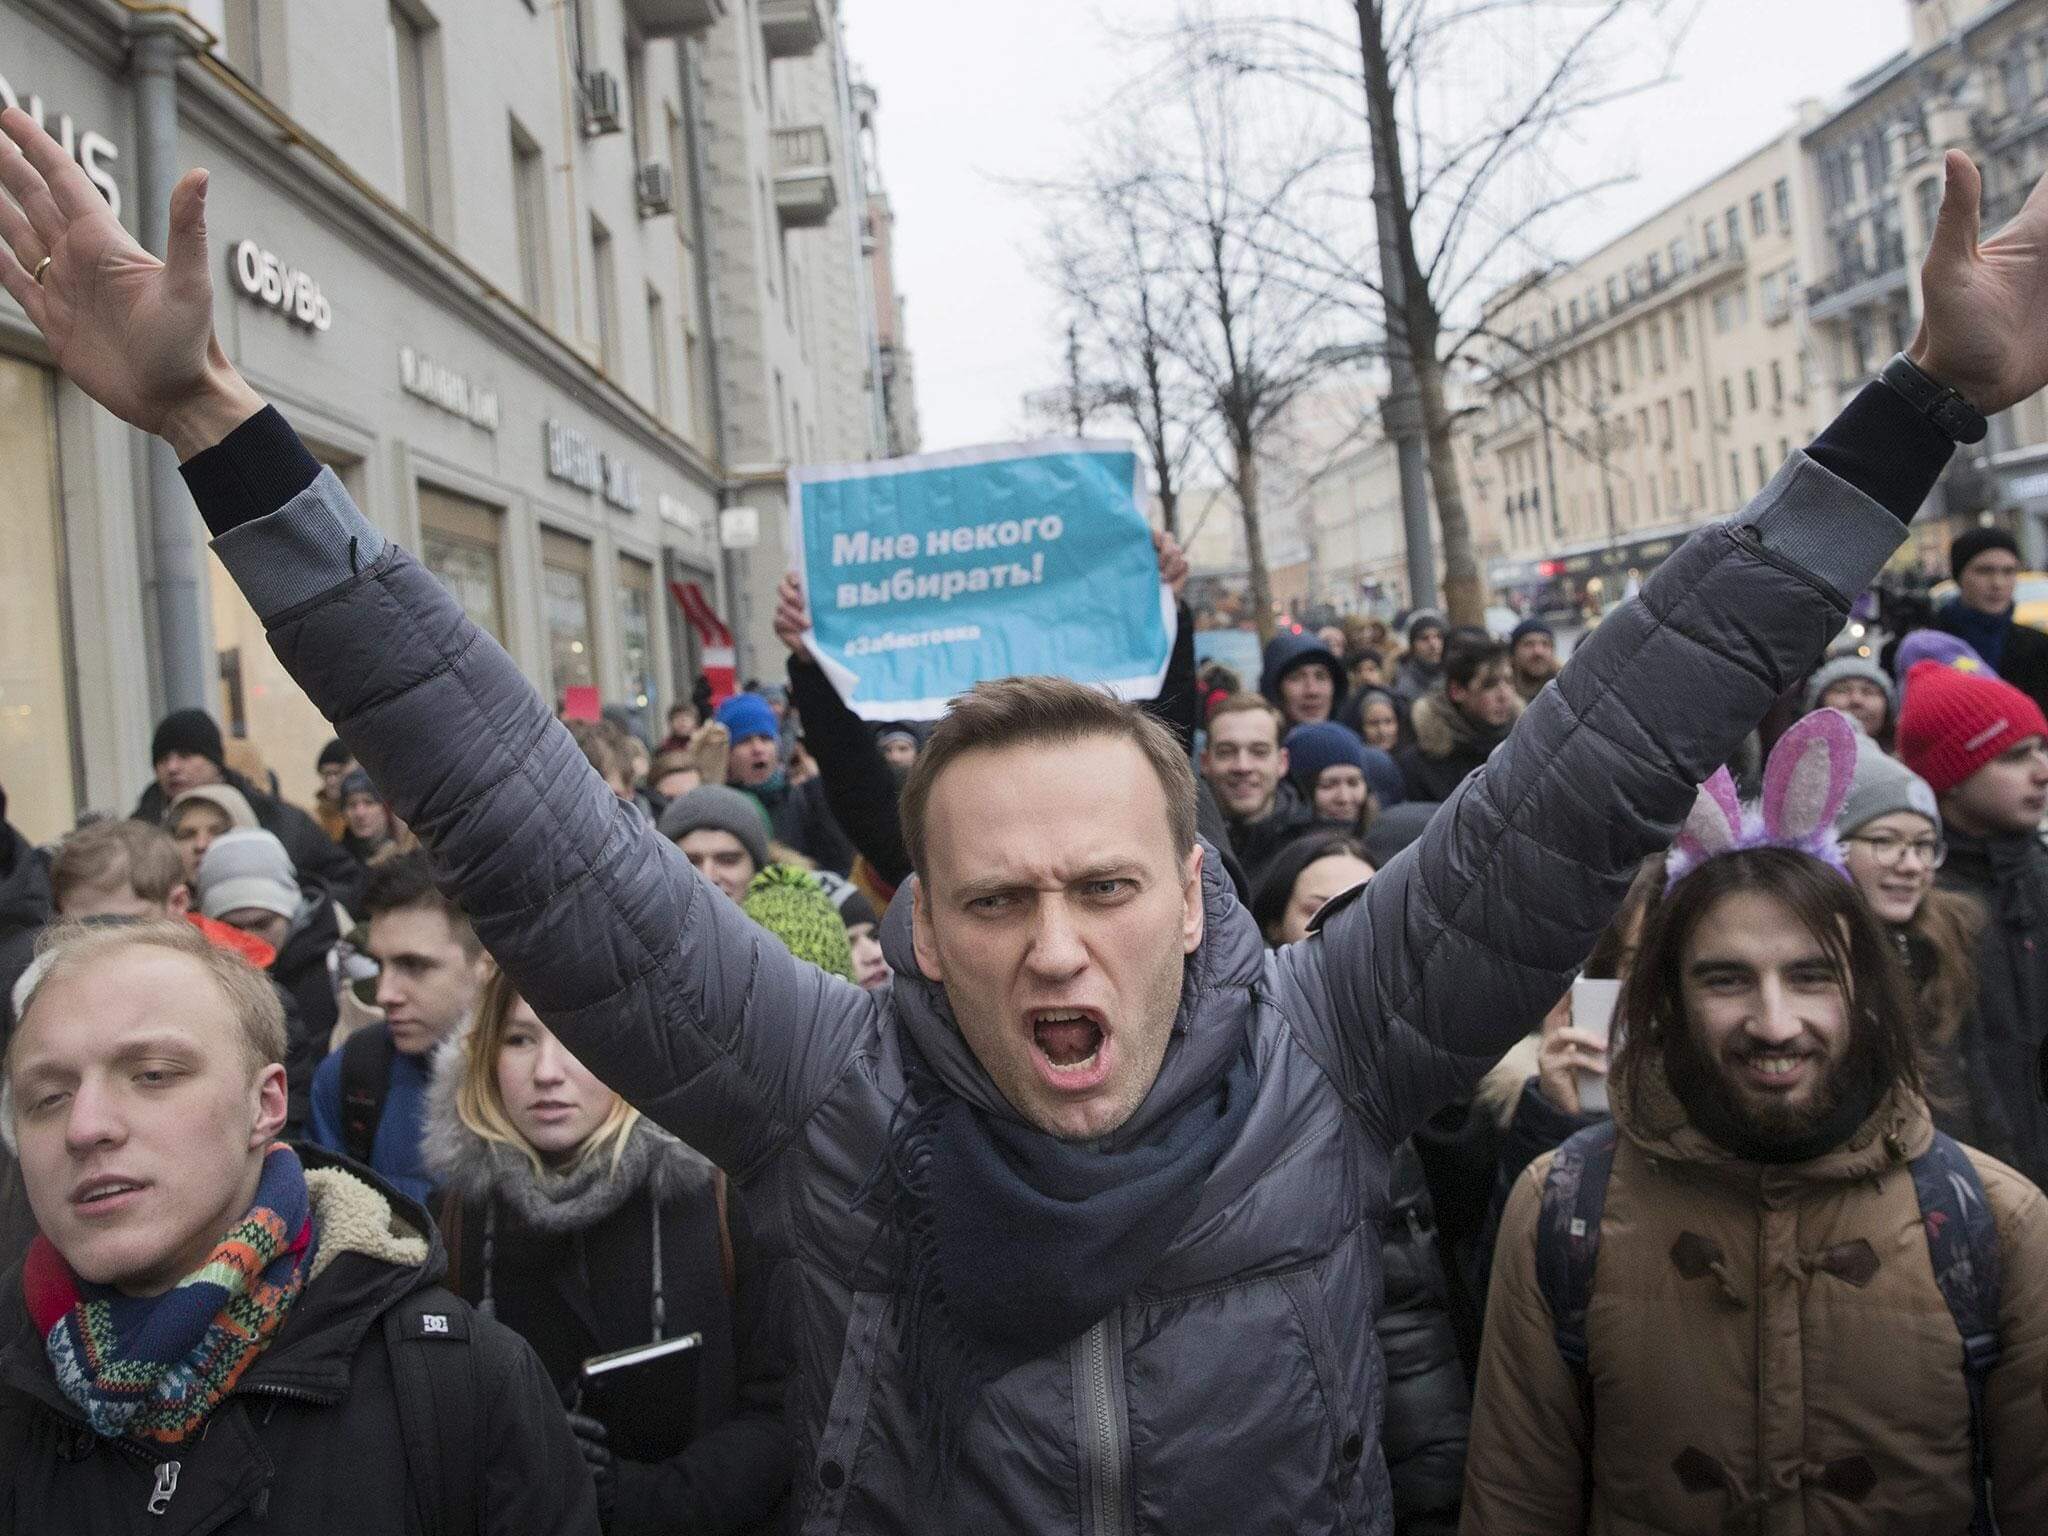 Russian opposition leader arrested ahead of presidential election